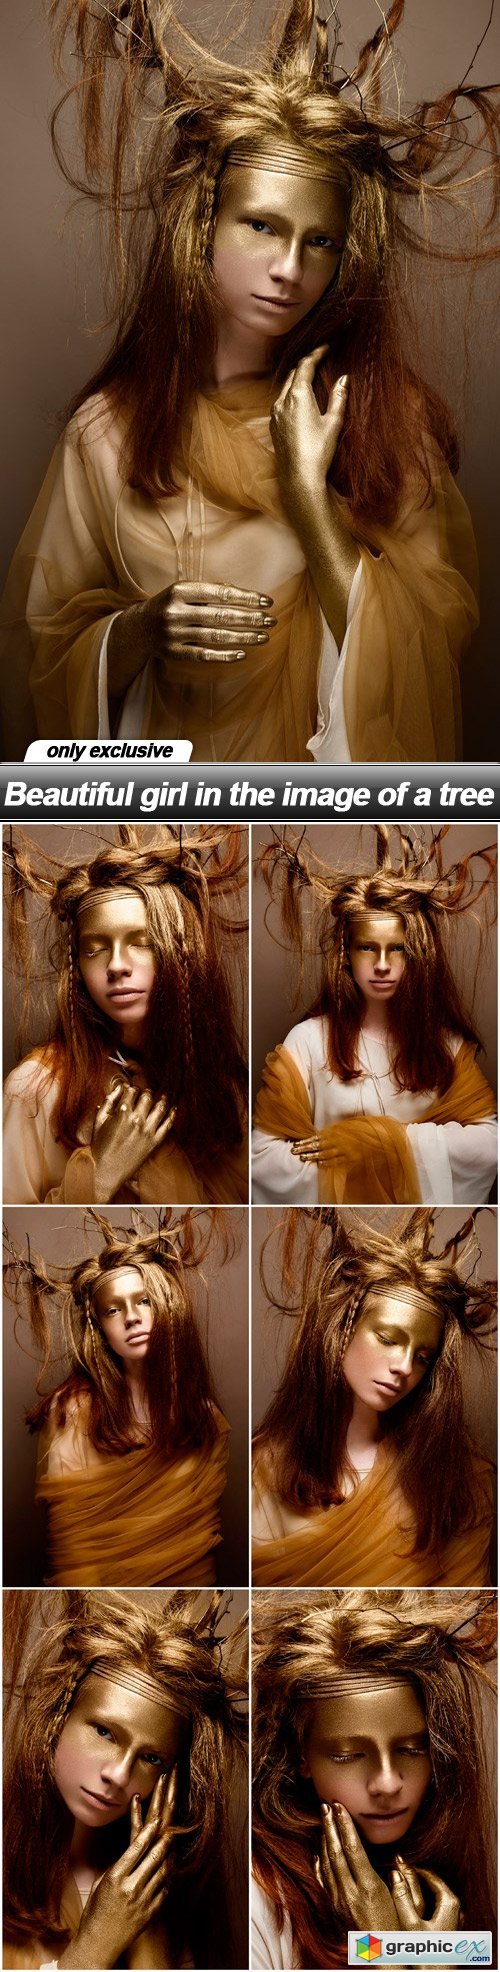 Beautiful girl in the image of a tree - 7 UHQ JPEG